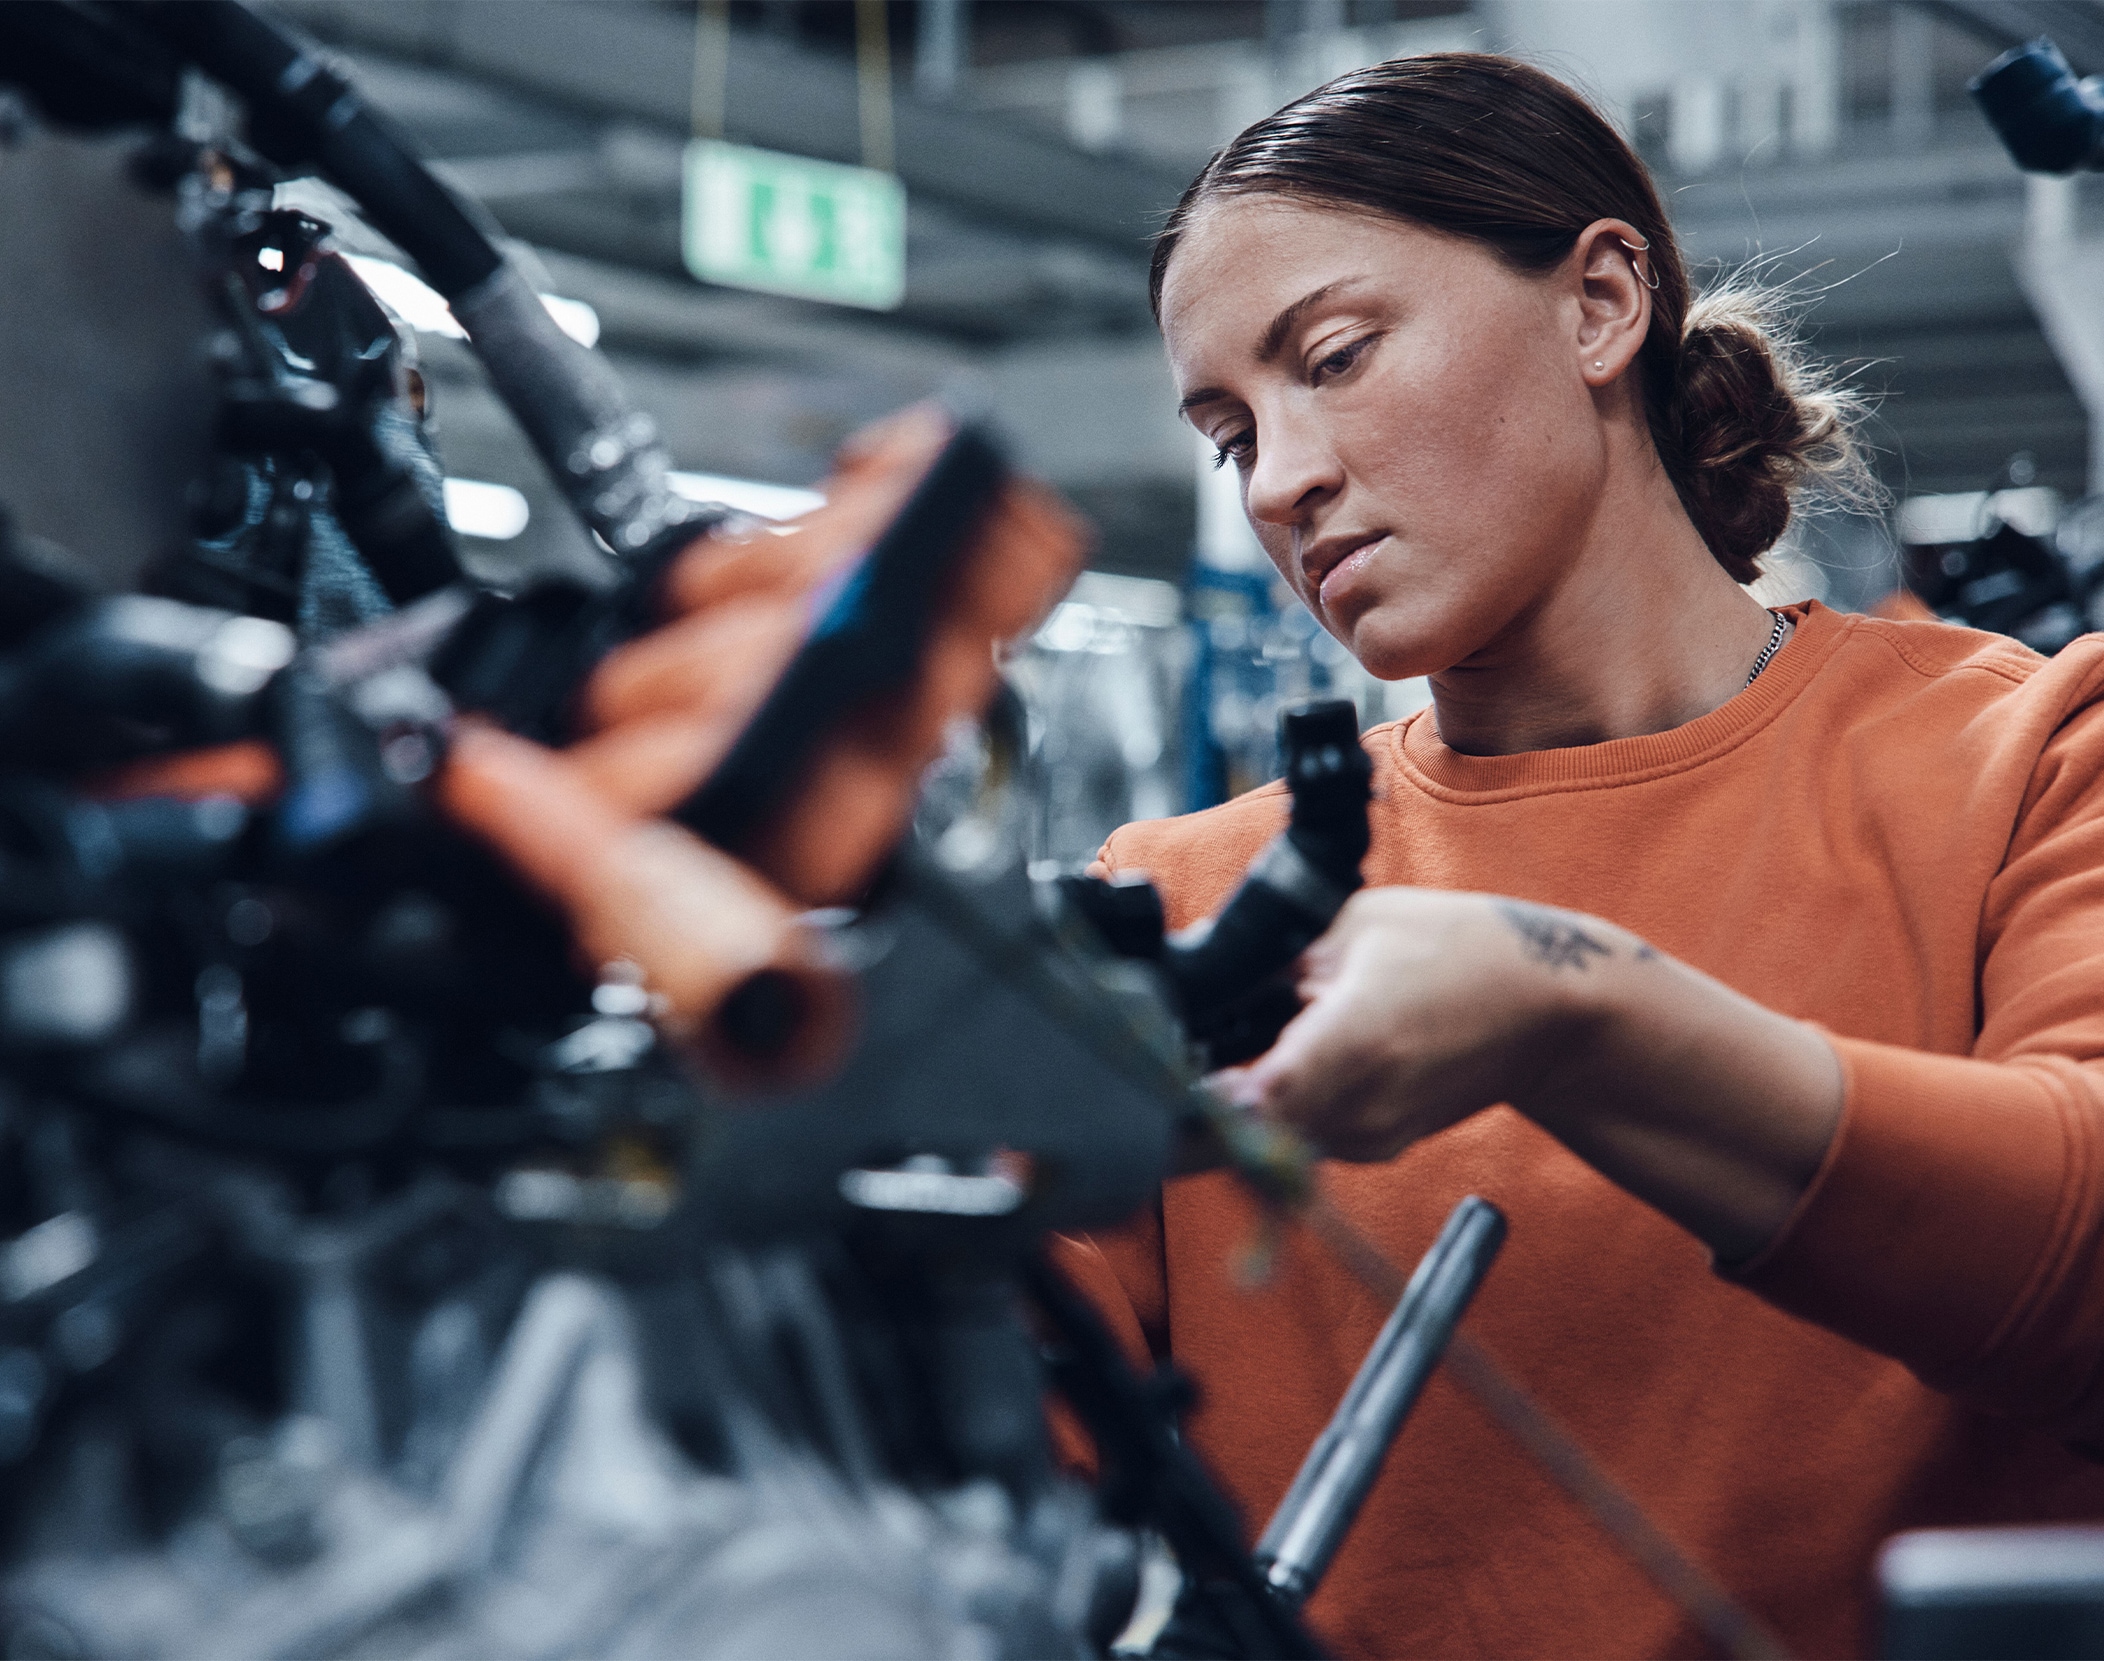 Woman Building Car in Plant - Career Opportunities at Volvo South Carolina Plant